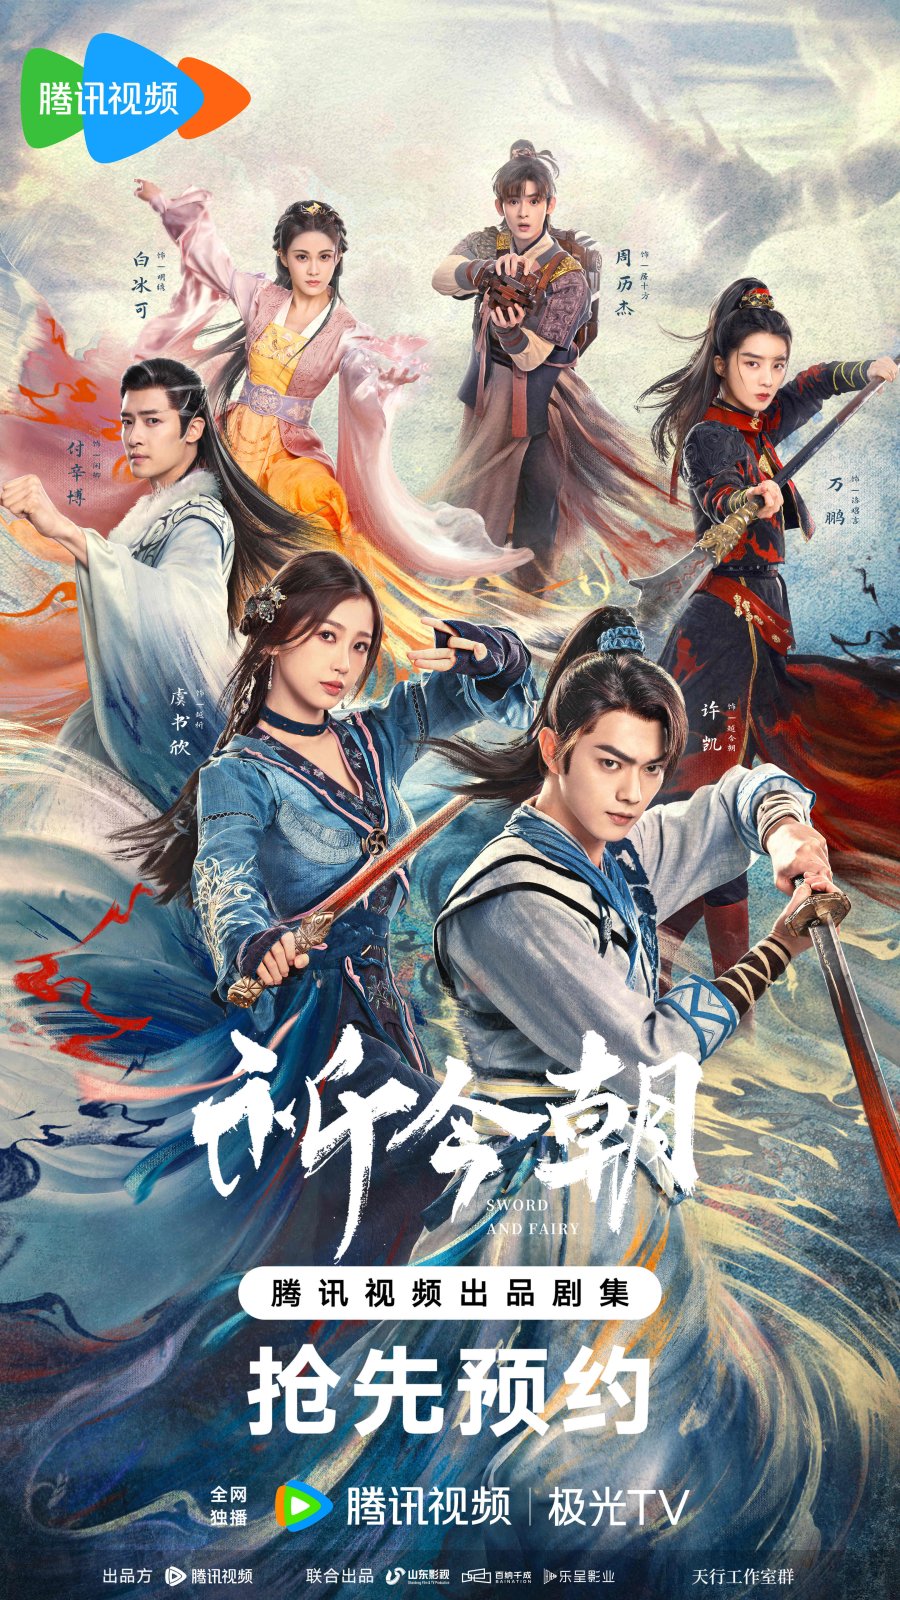 Chinese Paladin S6: Sword and Fairy